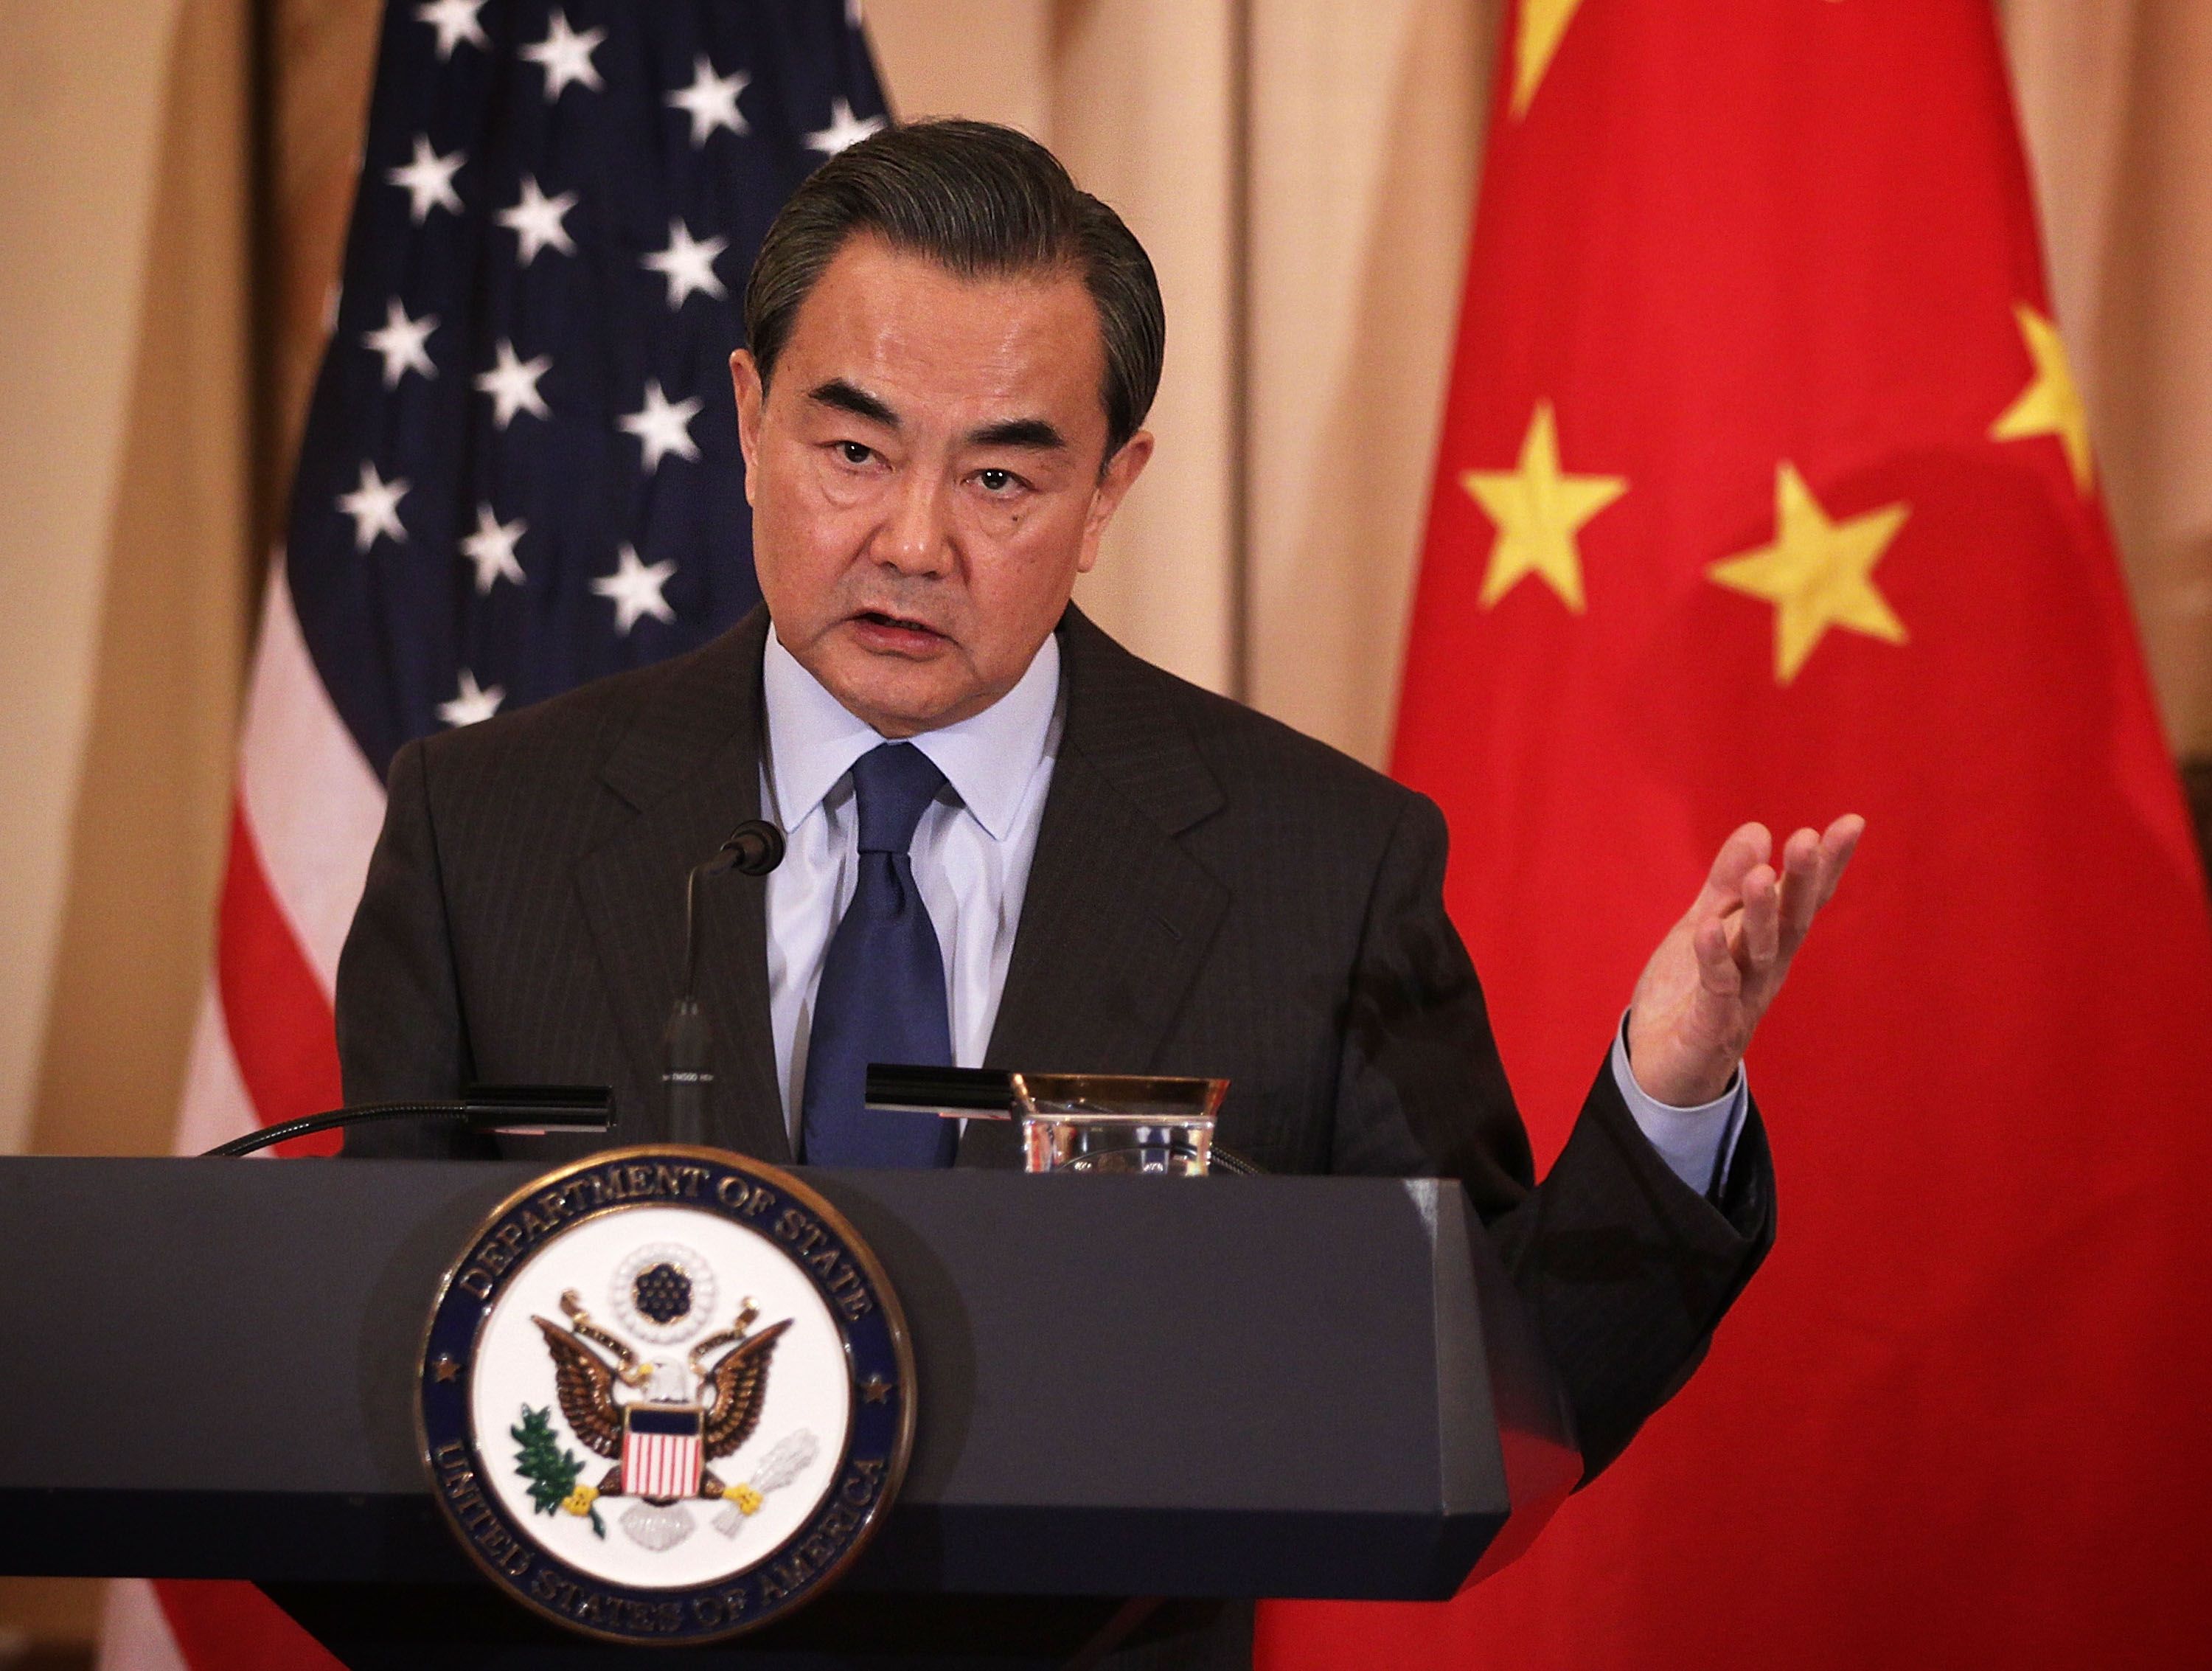 Chinese Foreign Minister Wang Yi (pictured) and US National Security Adviser Susan Rice have agreed on “the importance of a strong and united international response” to Pyongyang’s provocations. Photo: AFP